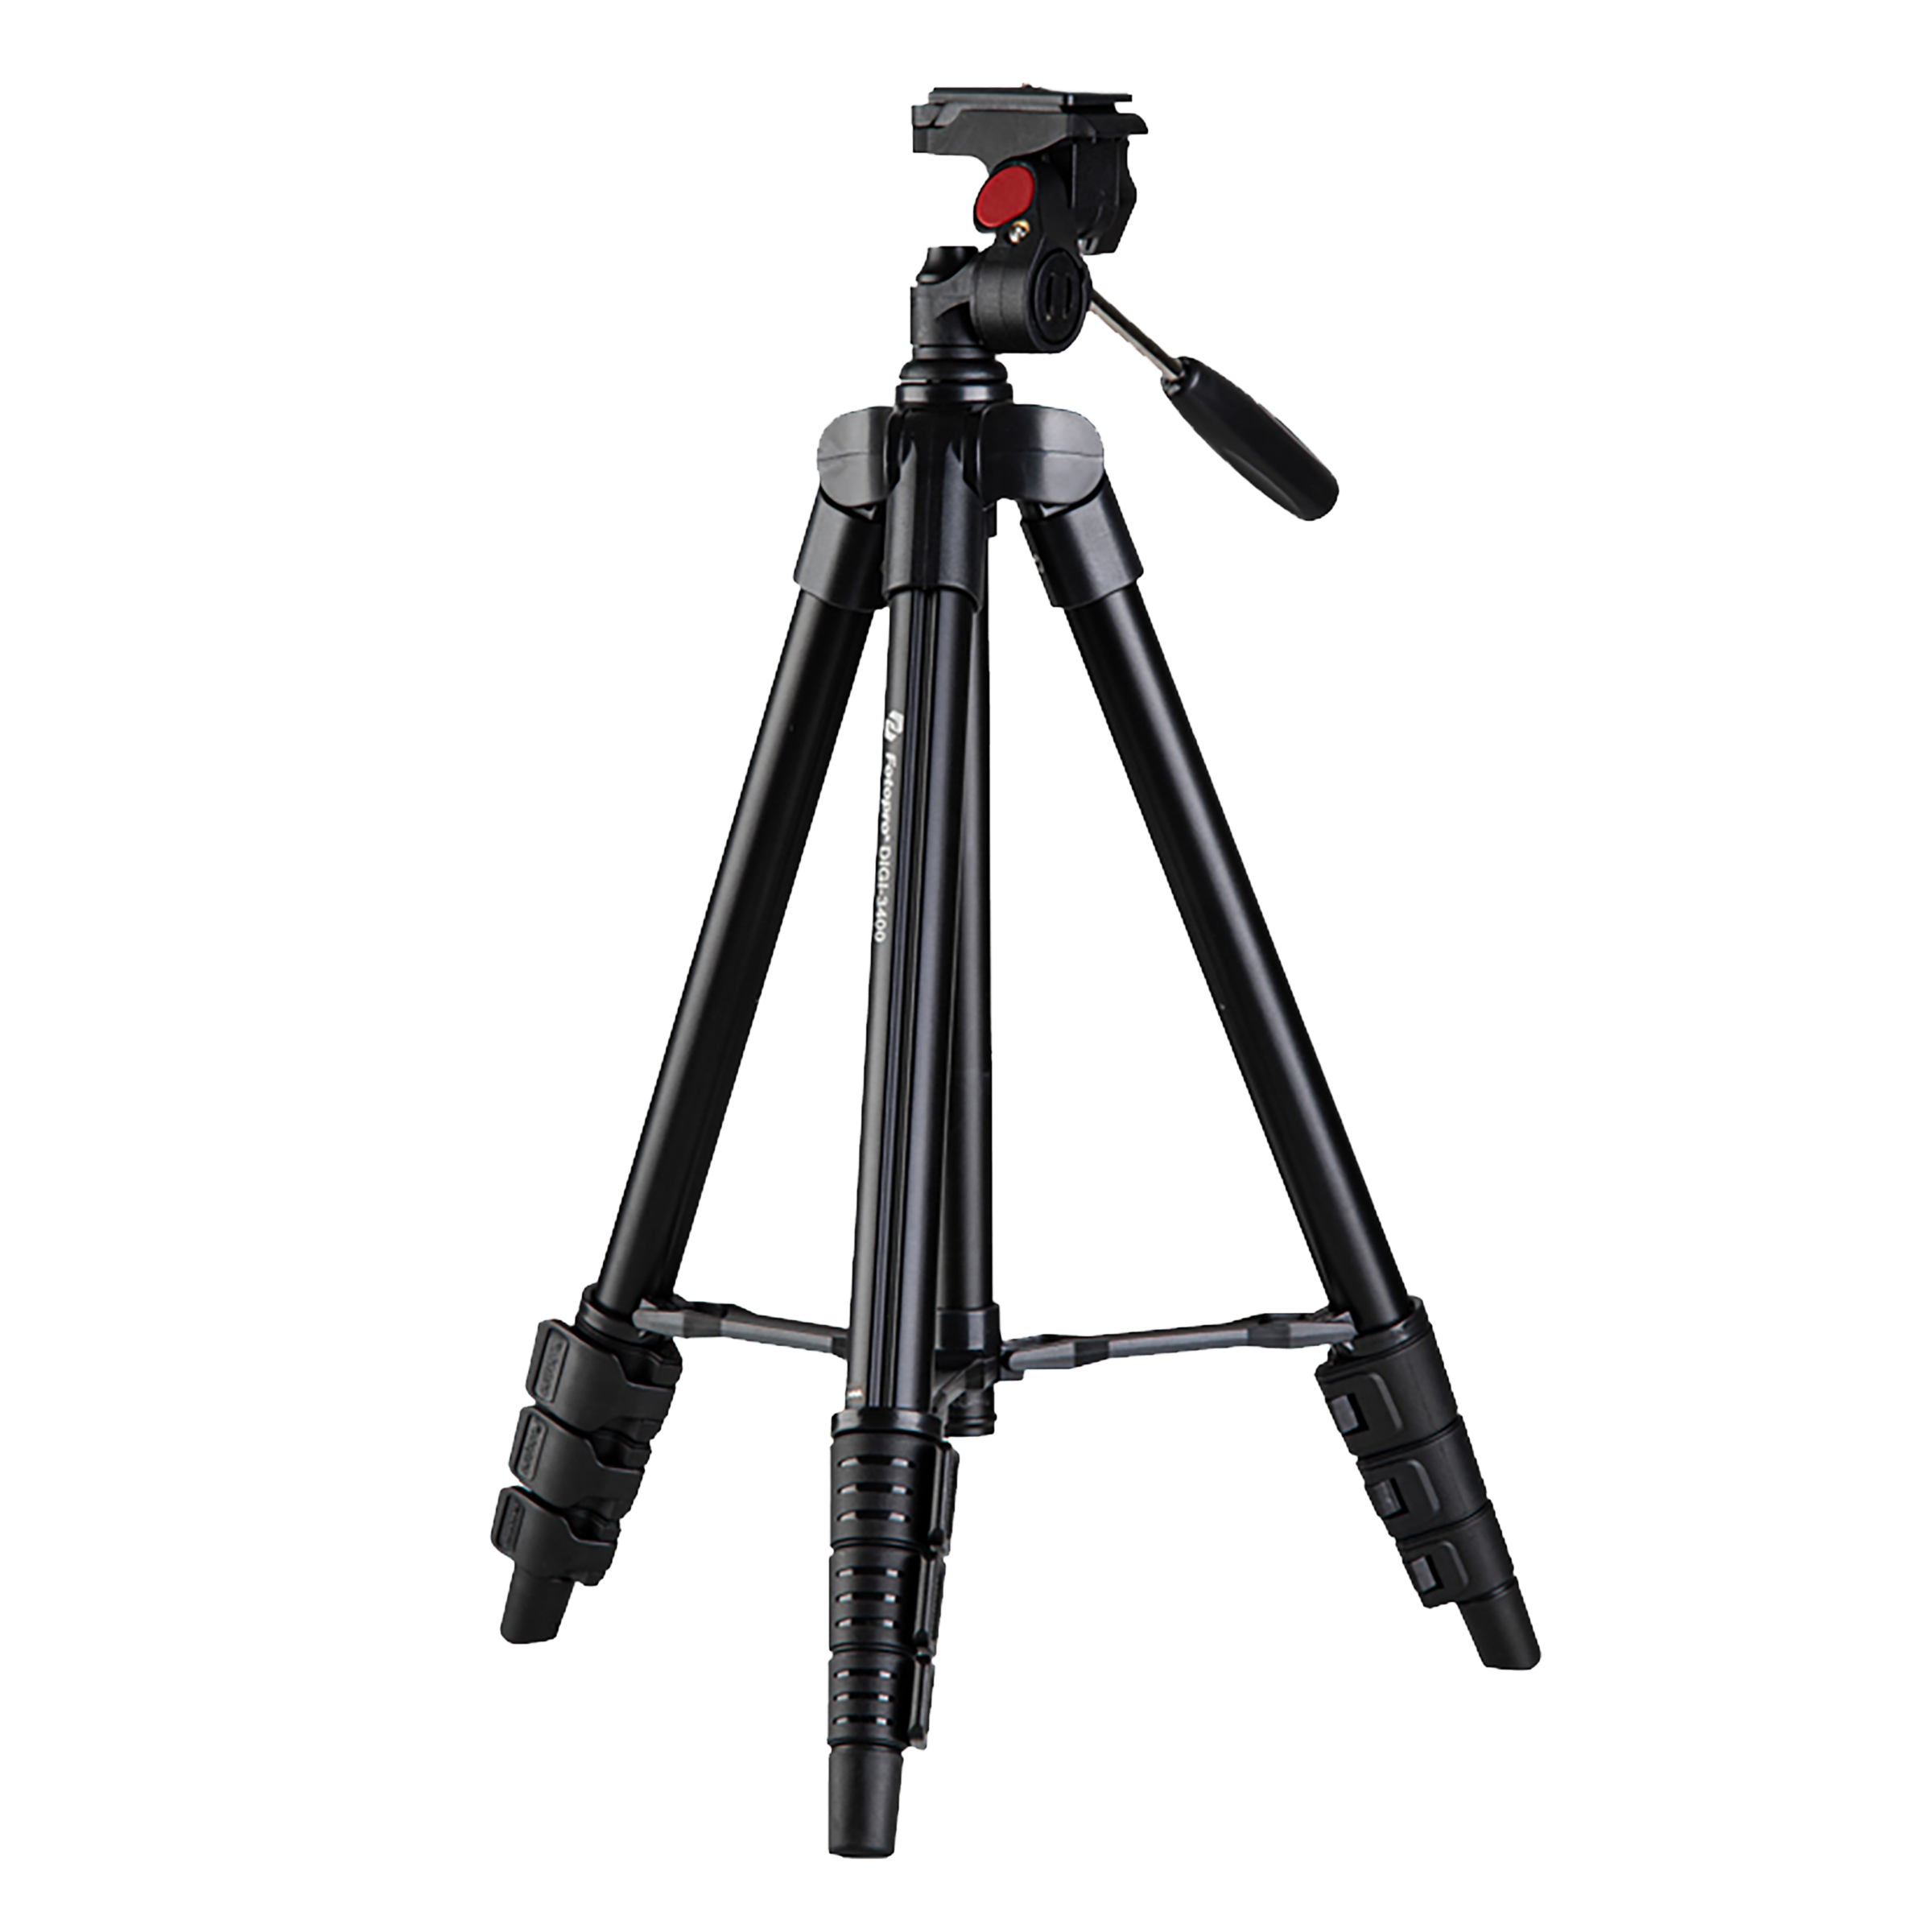 FotoPro DIGI-3400 121cm Adjustable Tripod for Mobile and Camera (3 Way Head with Adjustable Pan, Black)